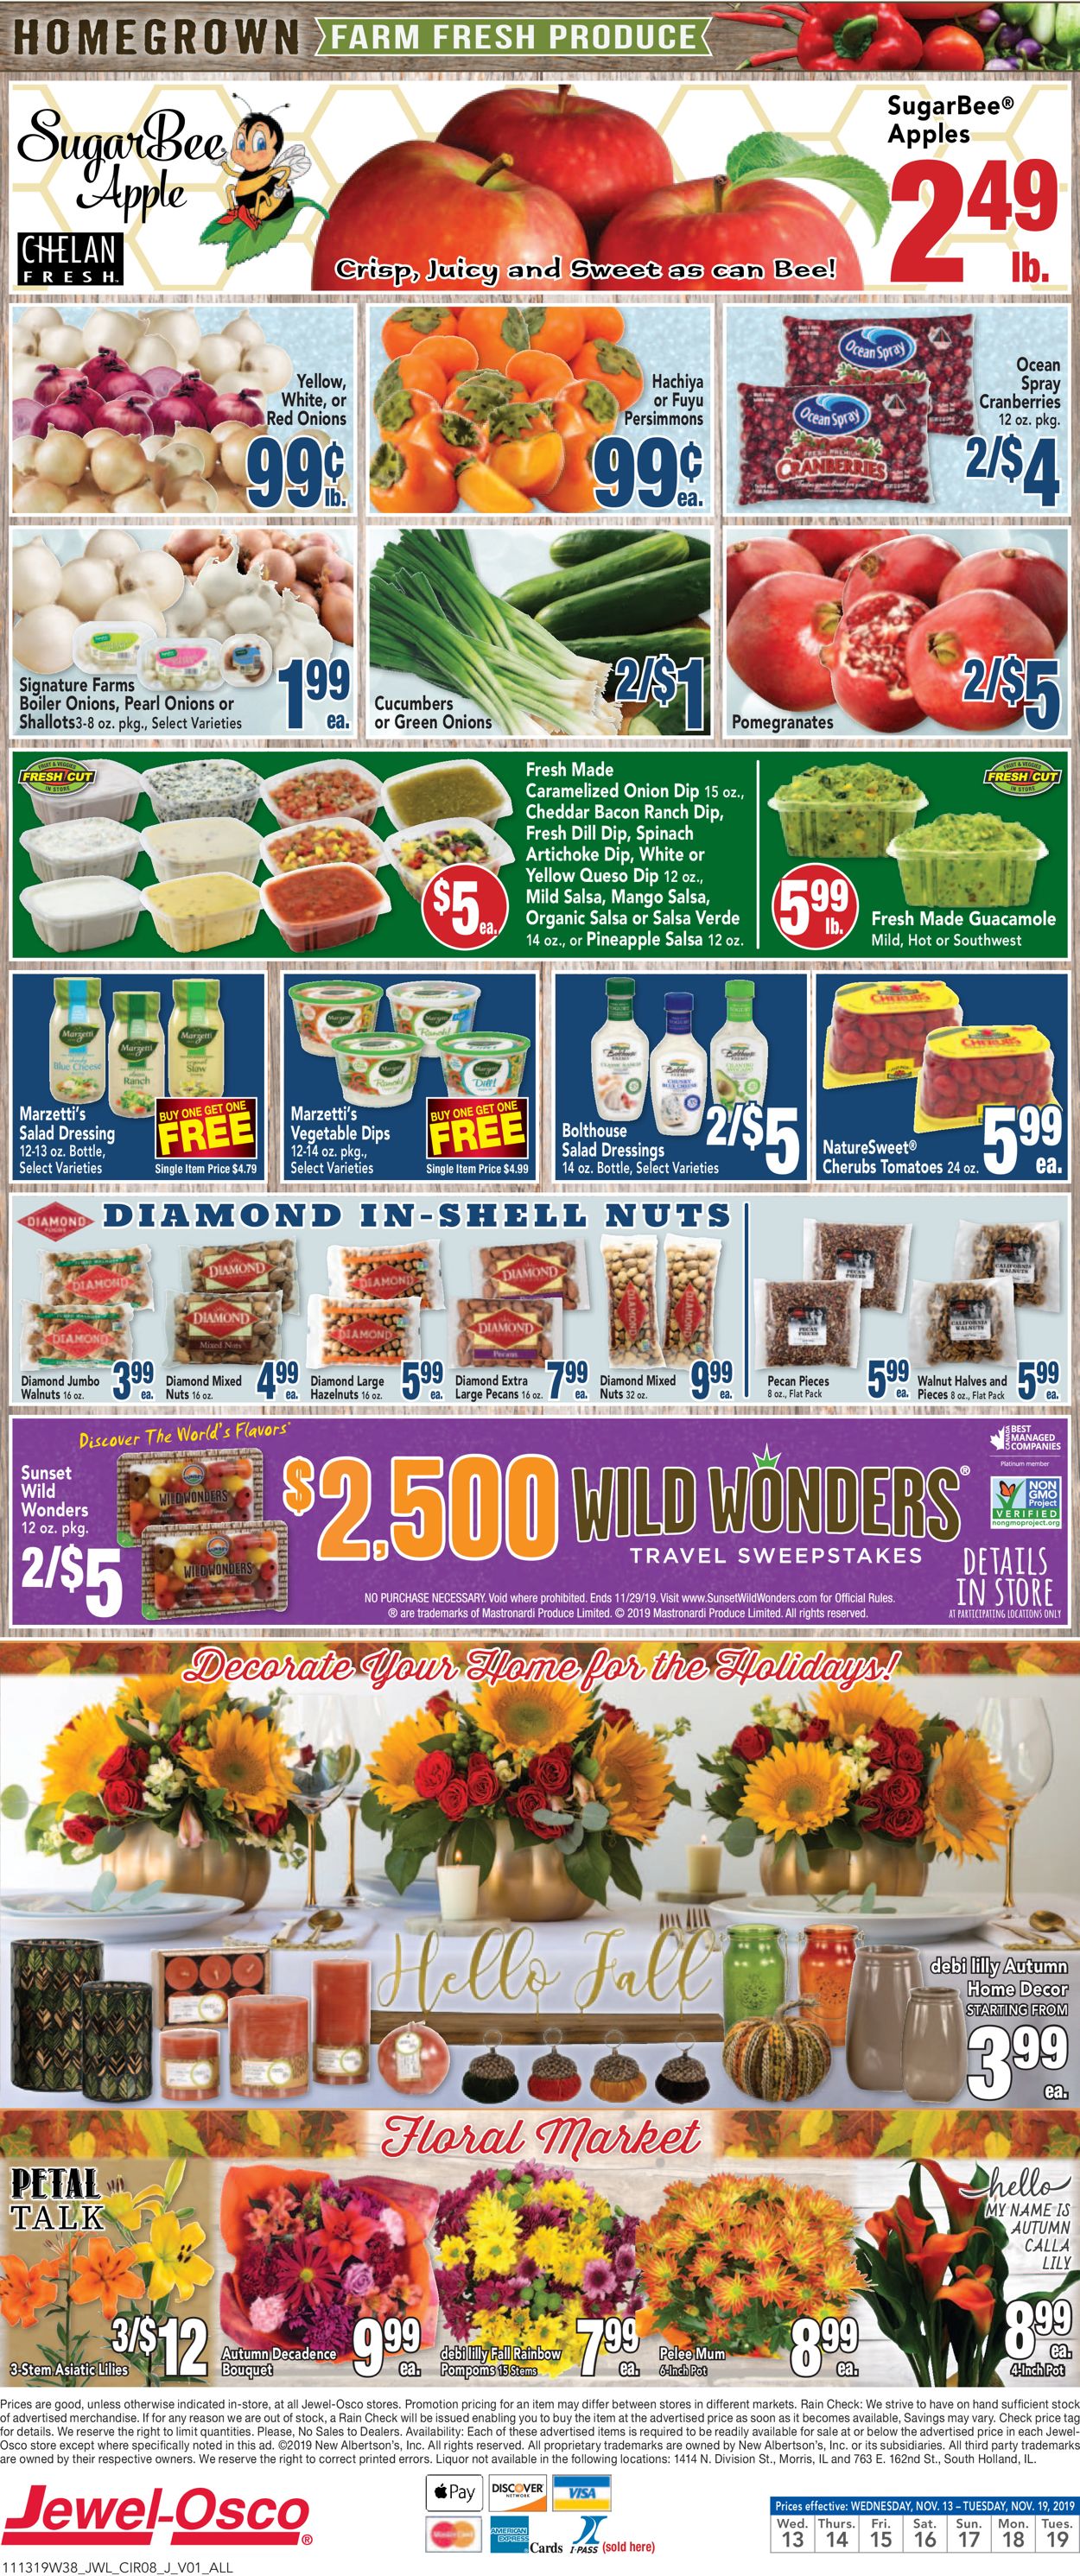 Jewel Osco Current weekly ad 11/13 - 11/19/2019 [11] - frequent-ads.com